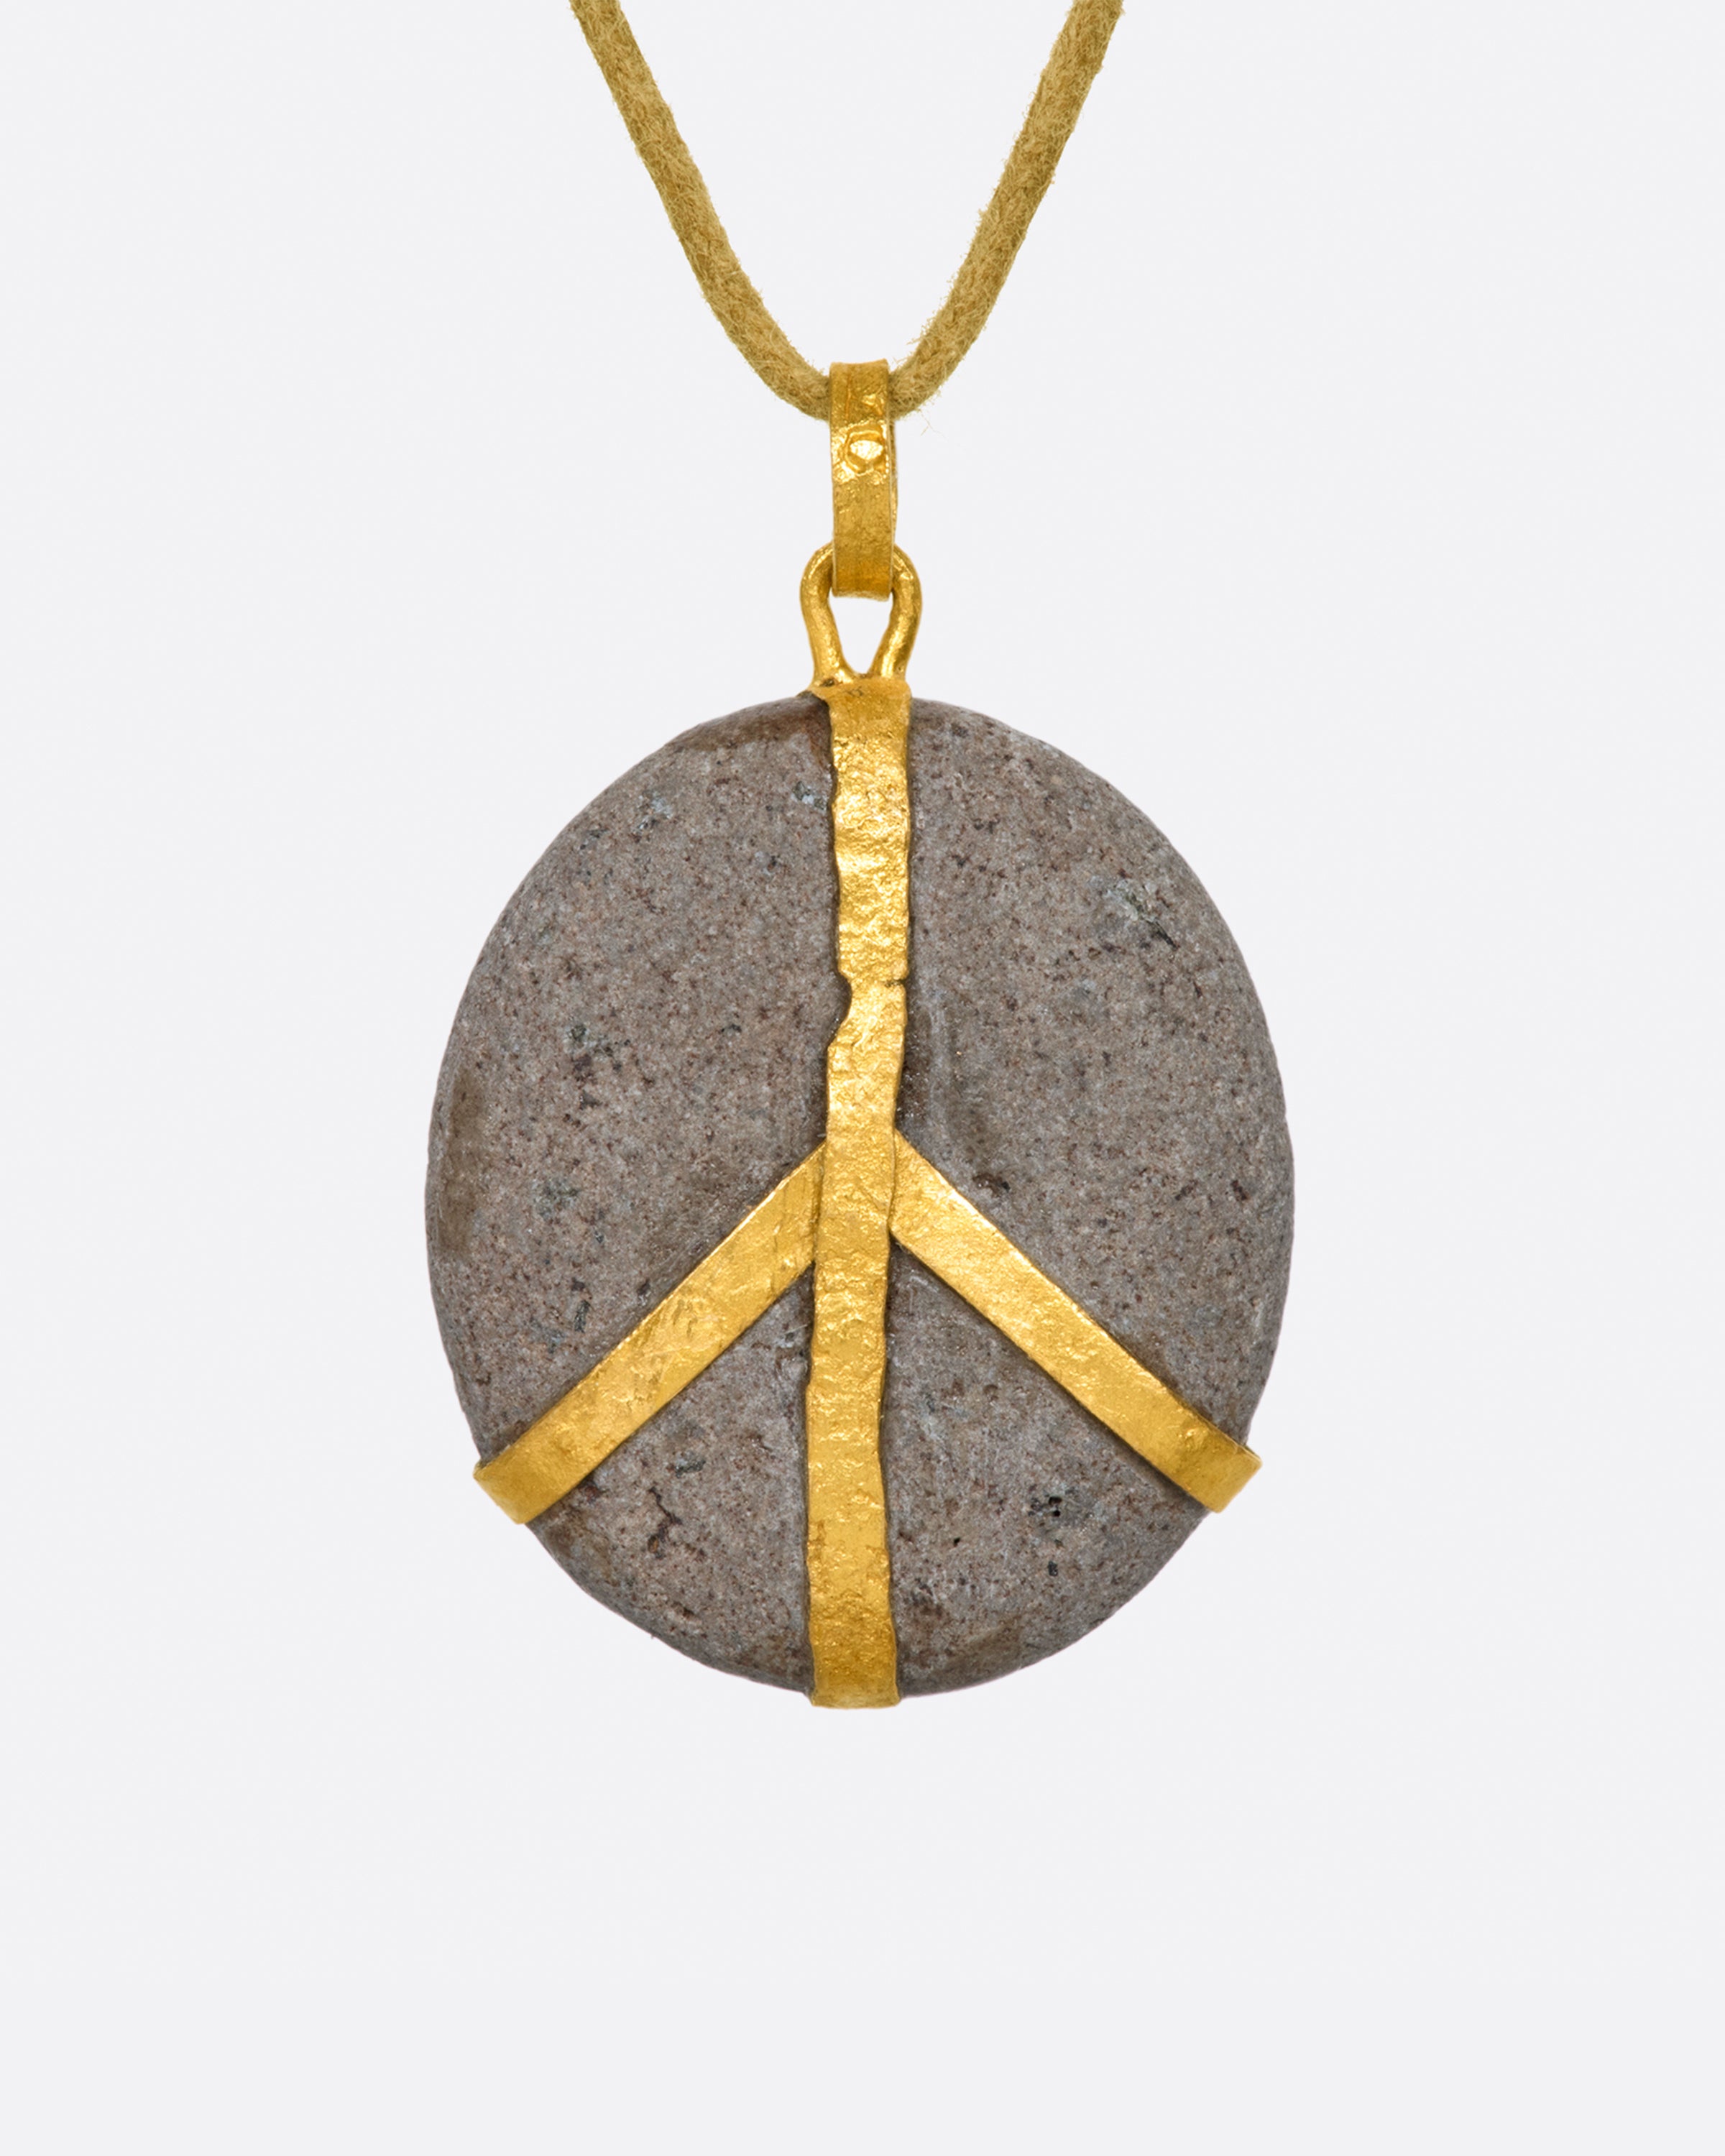 PEACE SIGN PEBBLE NECKLACE